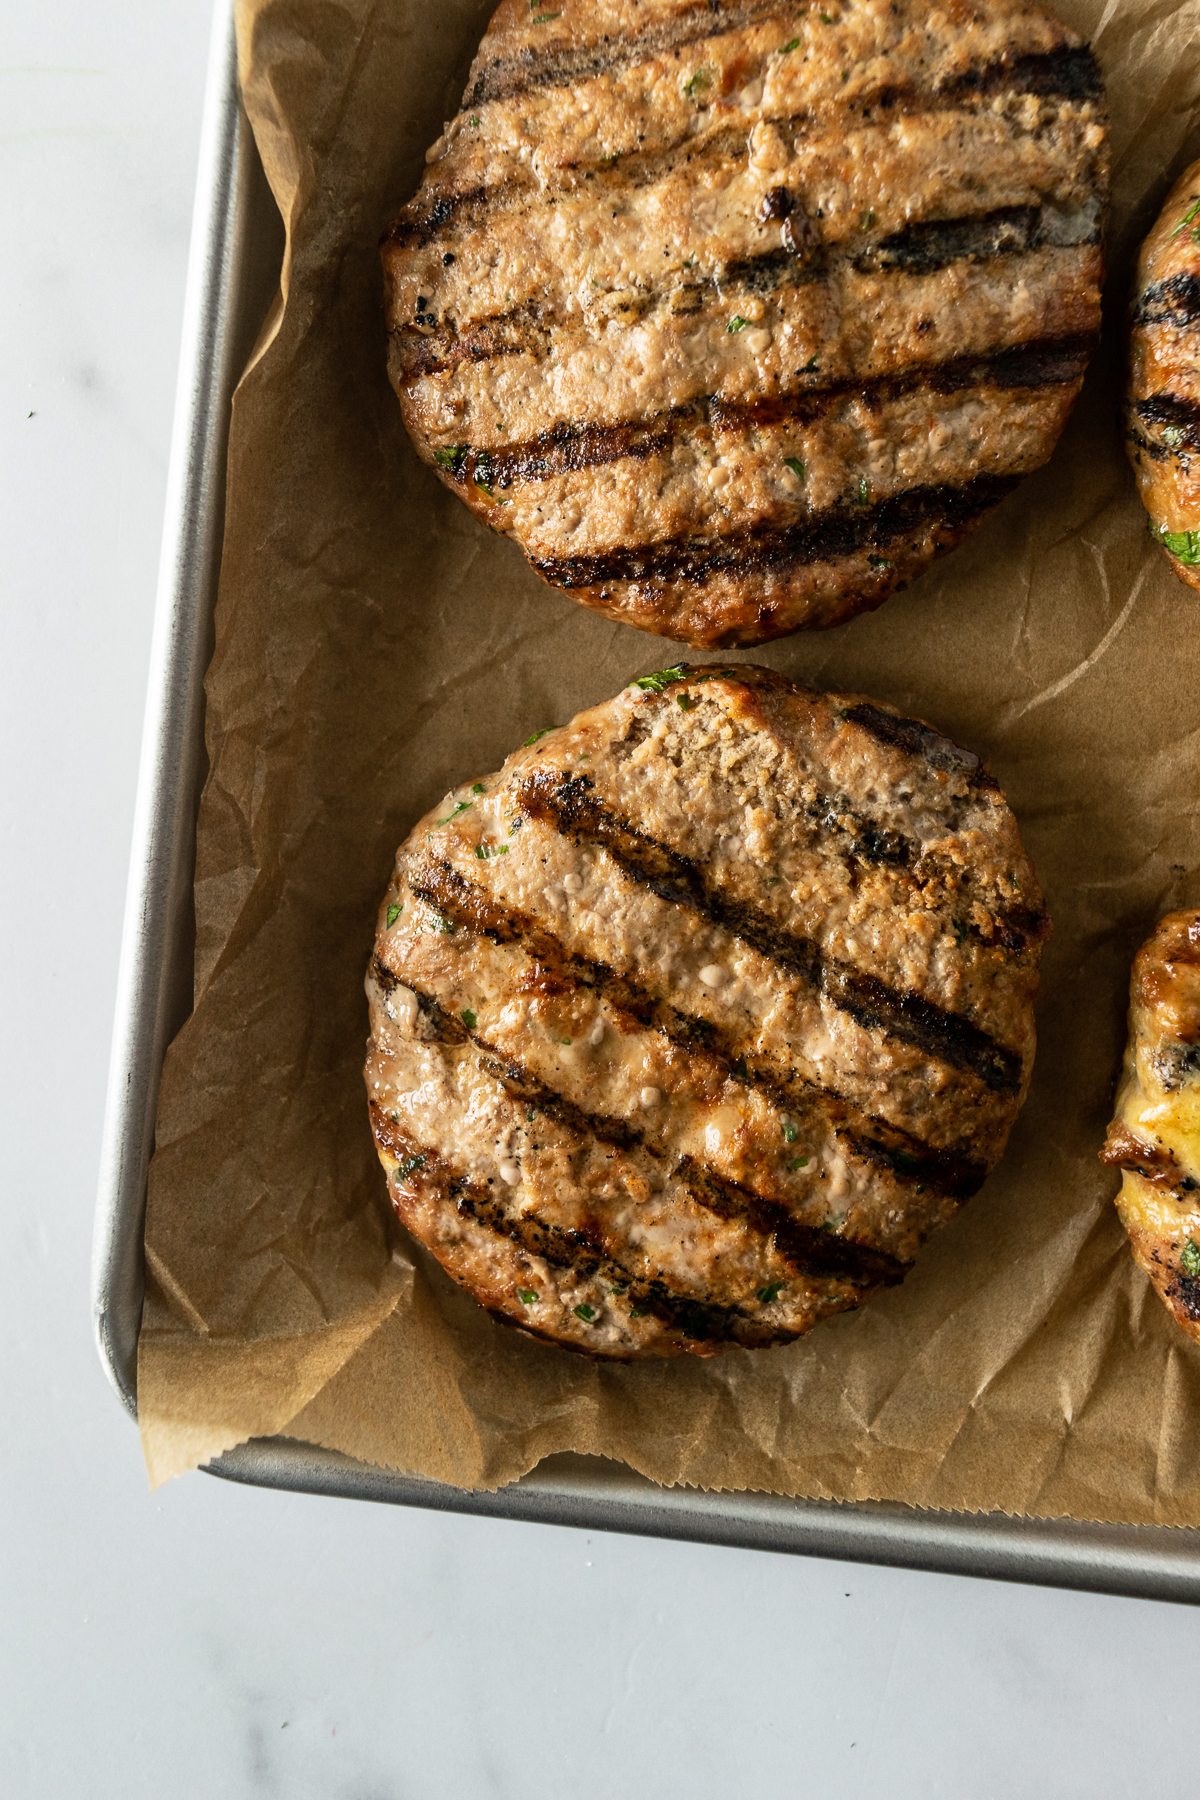 grilled turkey burgers on a baking sheet lined with brown parchment paper.